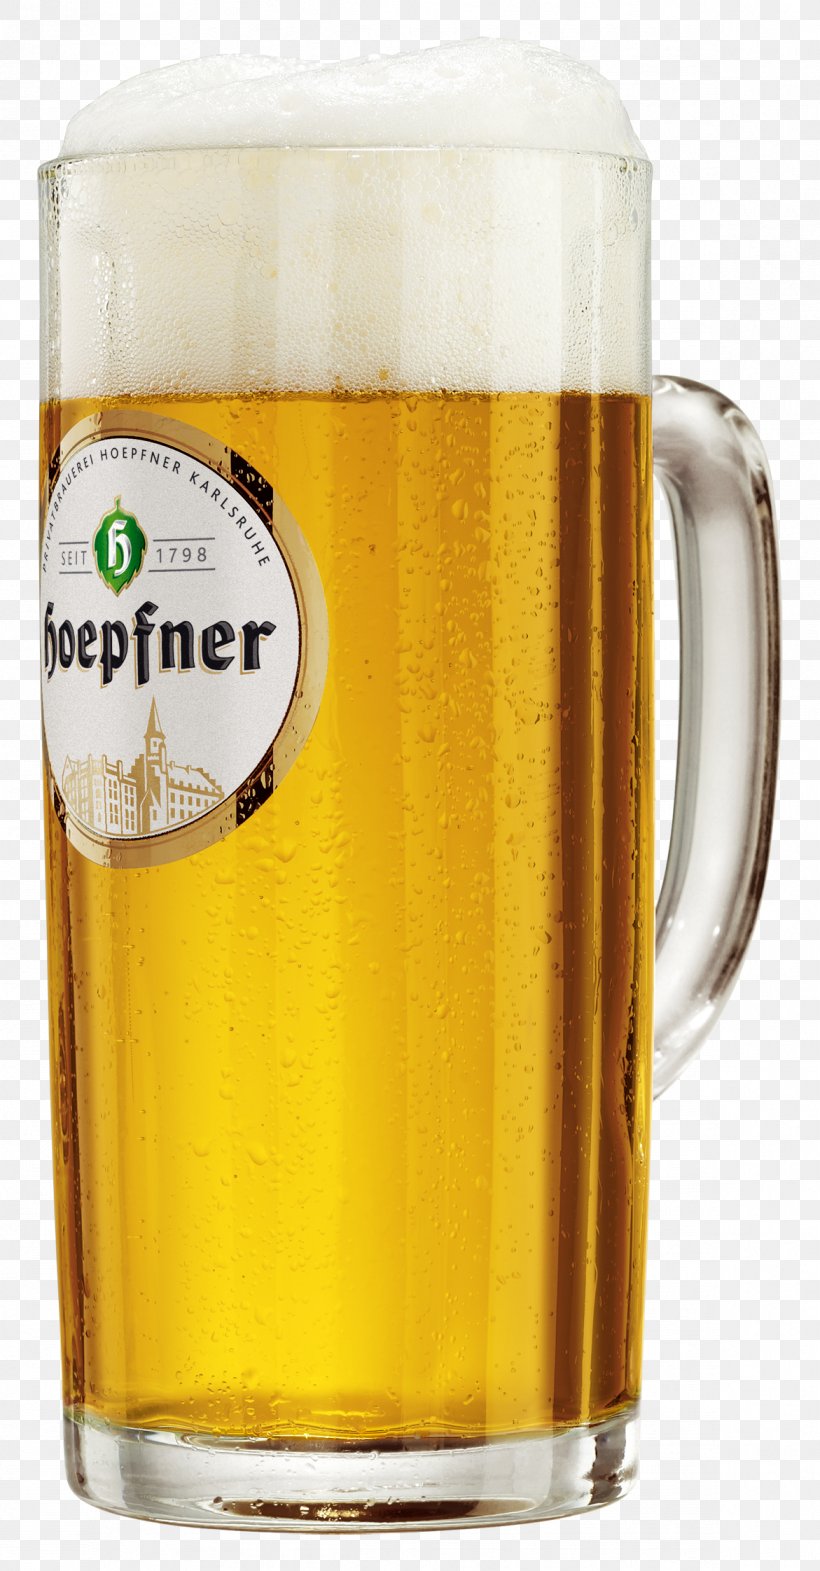 Beer Cocktail Pint Glass Lager Imperial Pint, PNG, 1171x2244px, Beer Cocktail, Beer, Beer Glass, Beer Glasses, Beer Stein Download Free